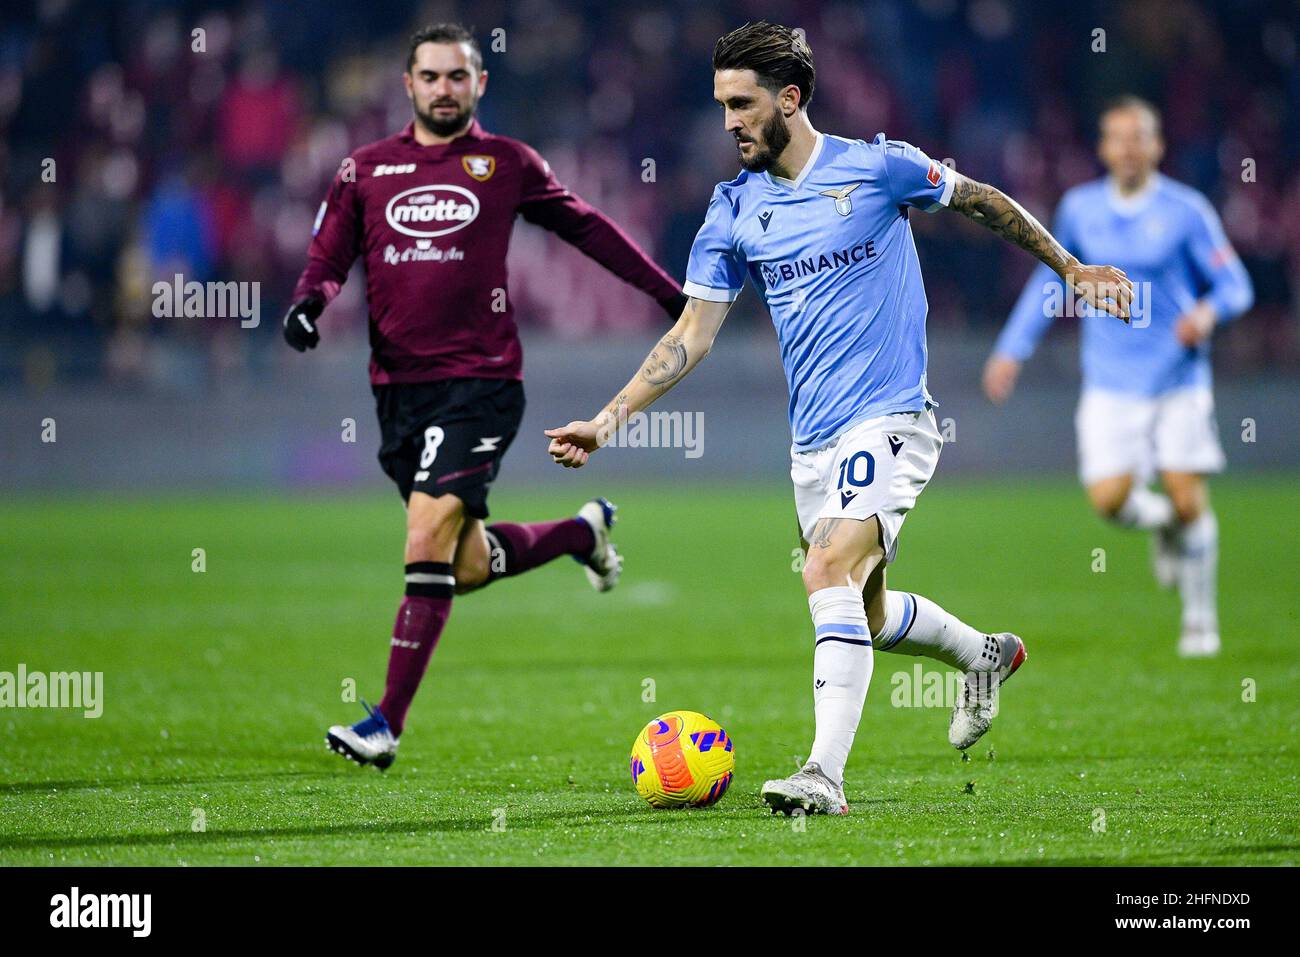 Luis Alberto of SS Lazio during the Serie A match between US Salernitana 1919 and Lazio at Stadio Arechi, Salerno, Italy on 15 January 2022. Photo by Stock Photo